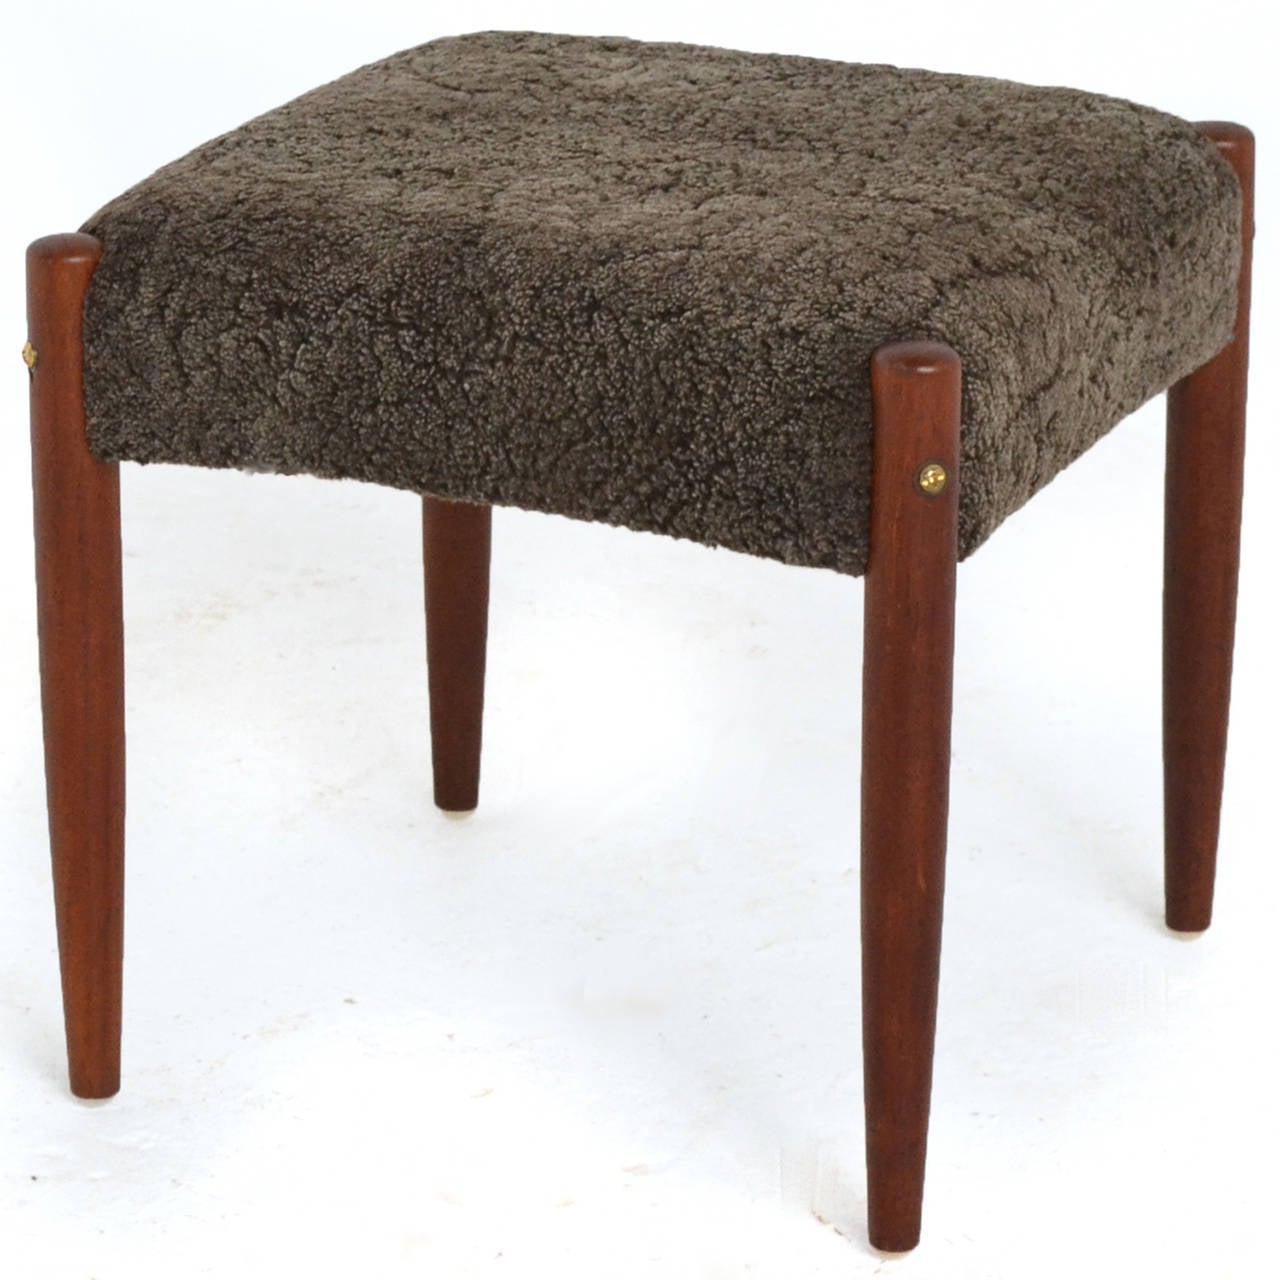 This Danish modern stool features teak legs and upholstery of gray sheepskin for a rich and comfortable seat.